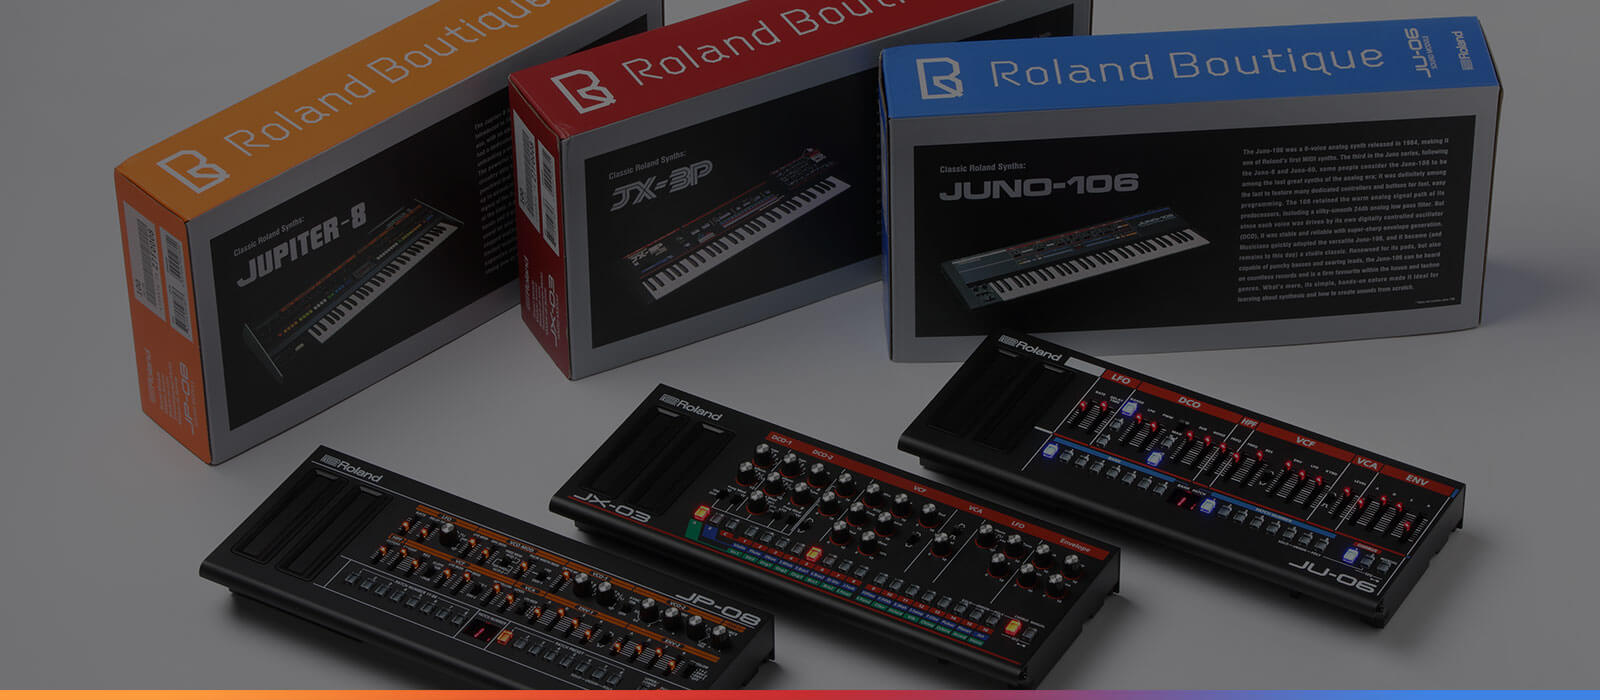 The Roland Boutique Series Story